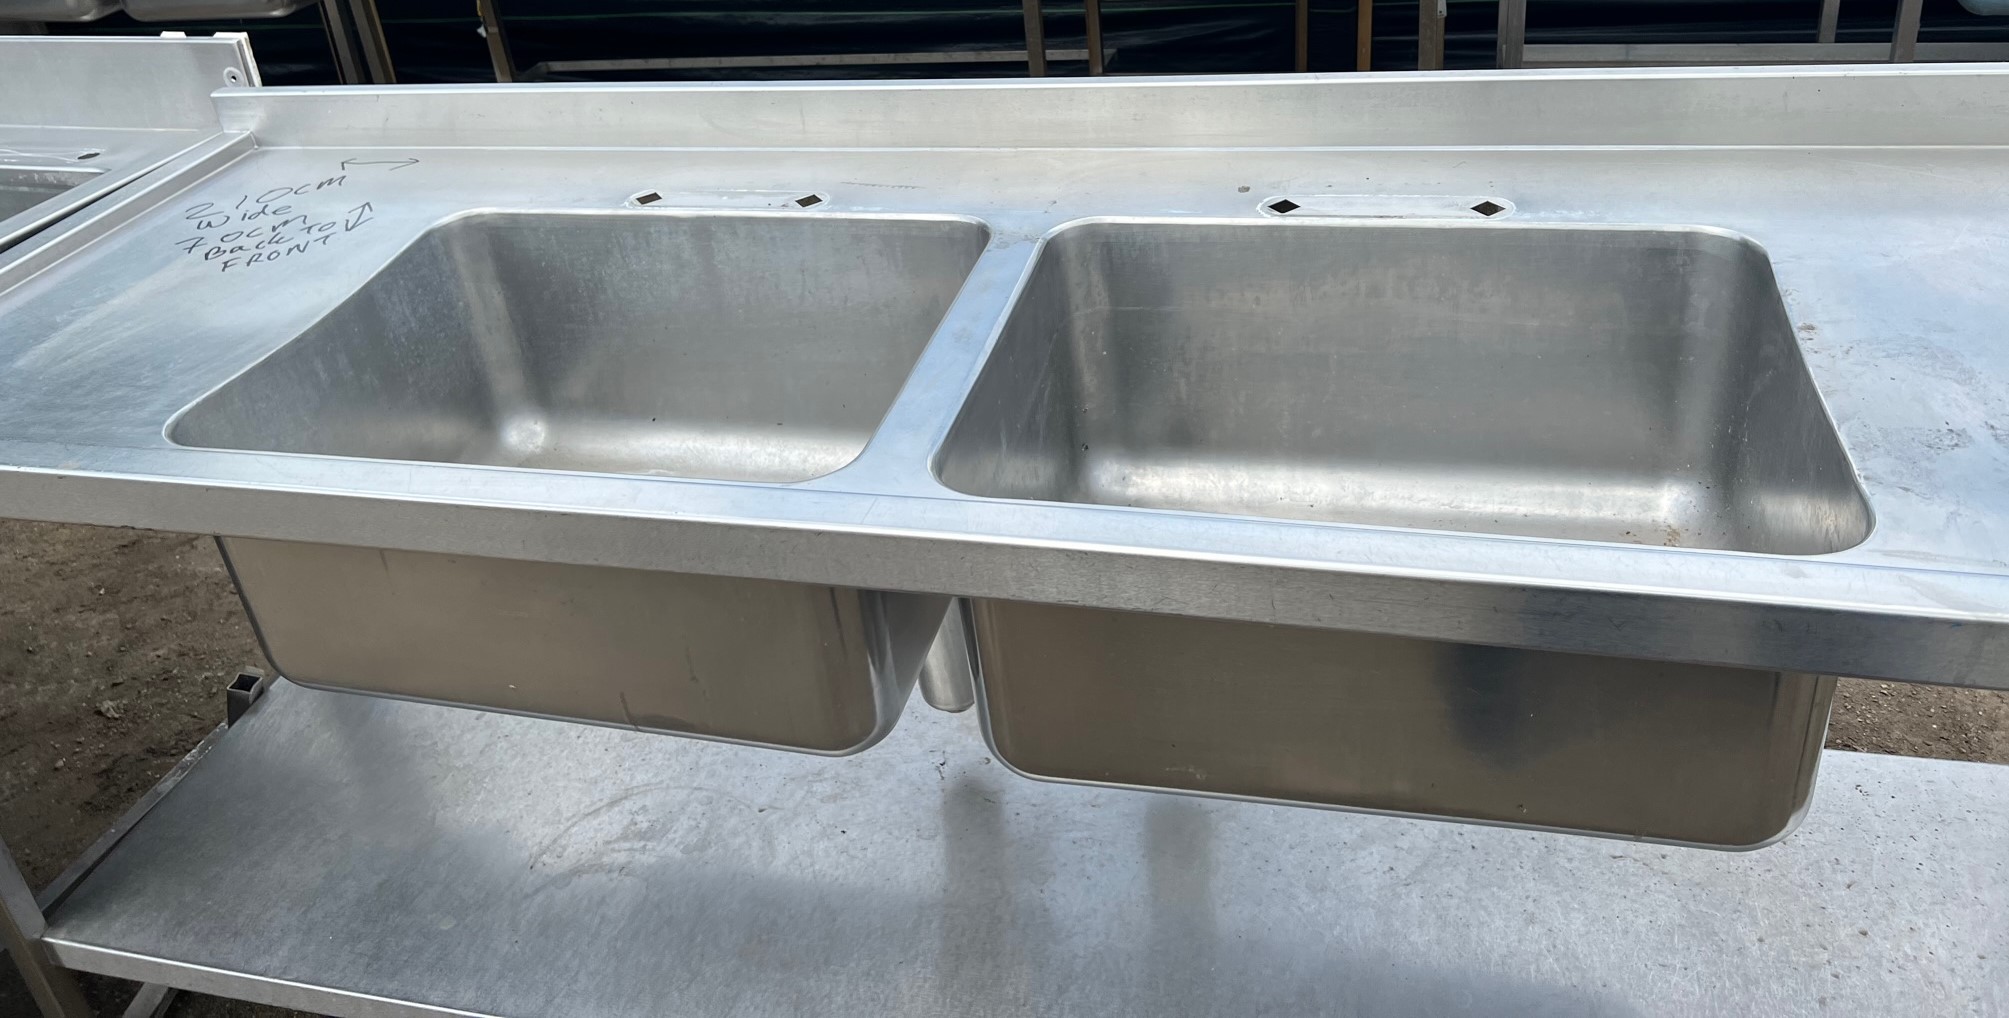 Double Bowl Double Drainer Sink